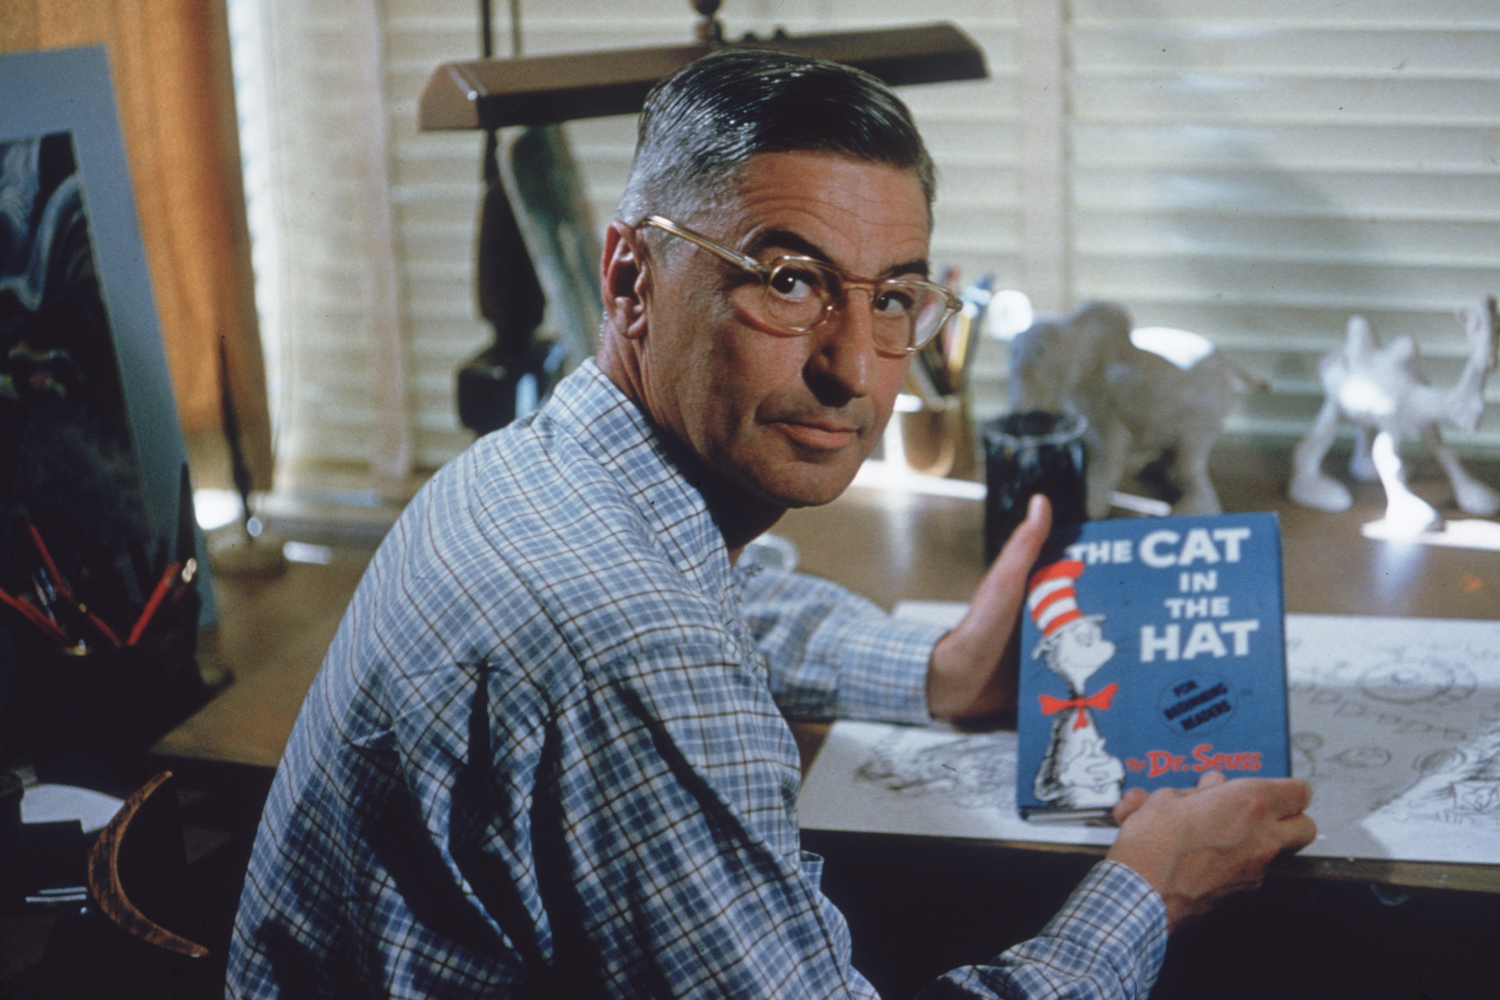 6 Dr. Seuss Books Will No Longer Be Published Due To “Hurtful And Wrong” Racist Depictions